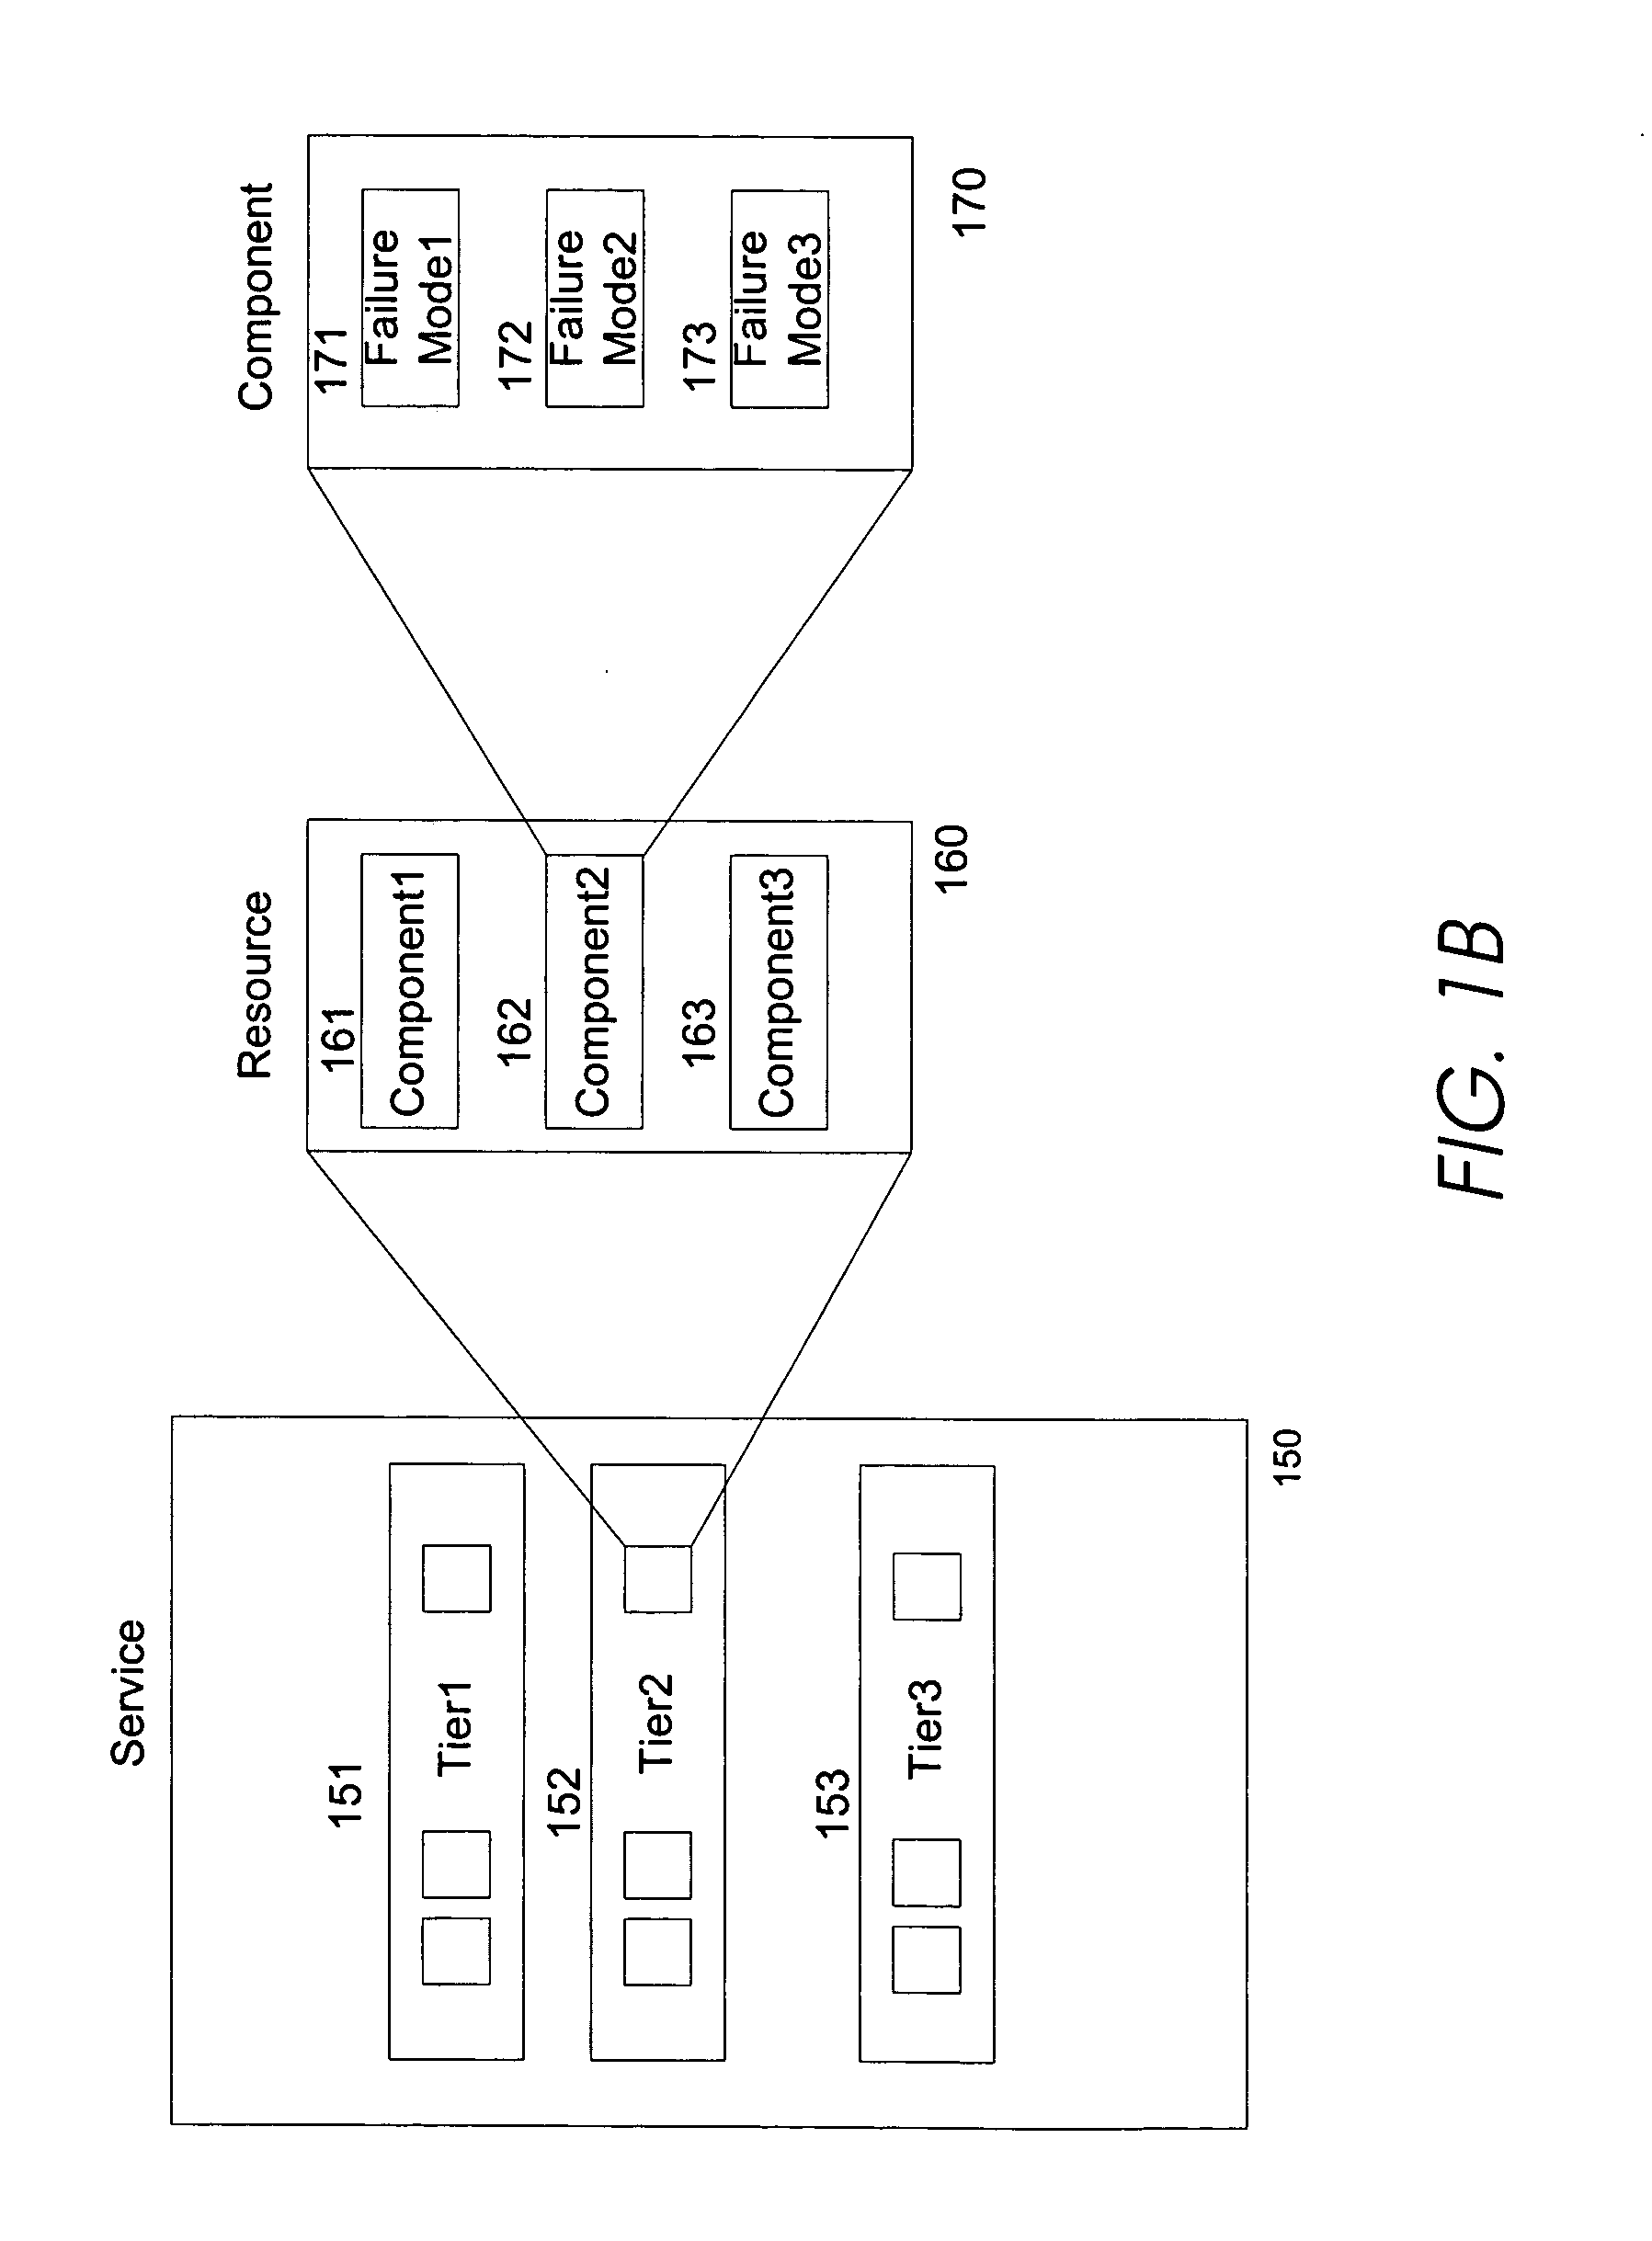 Method and apparatus for enhanced design of multi-tier systems